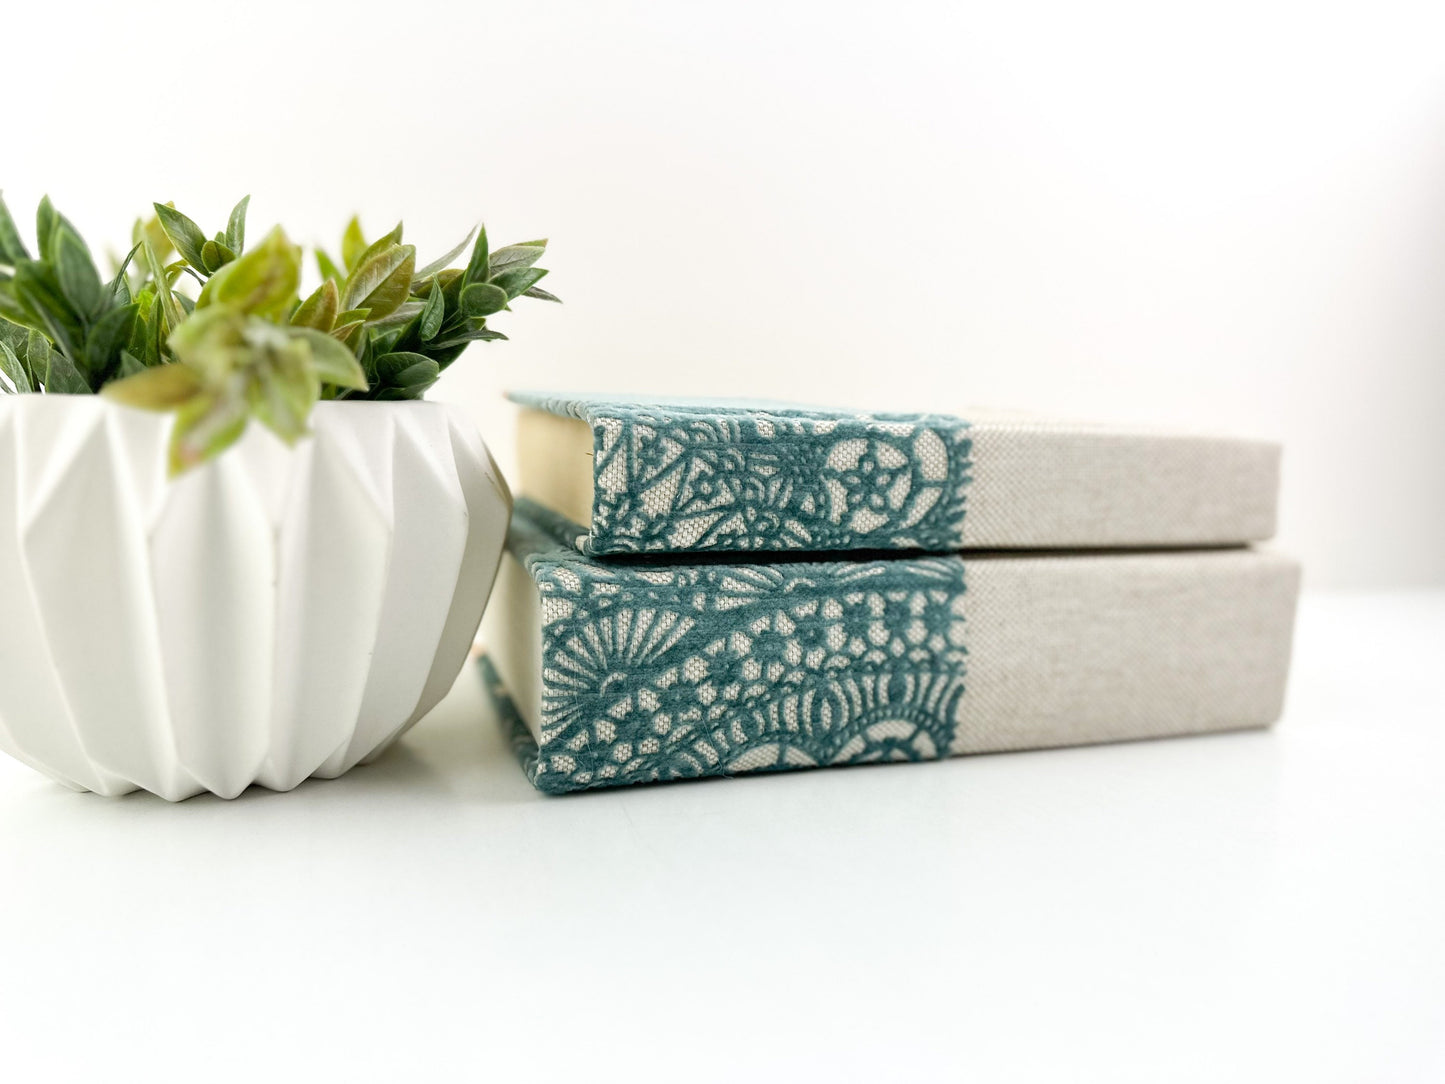 Fabric Covered Books for Home Decor